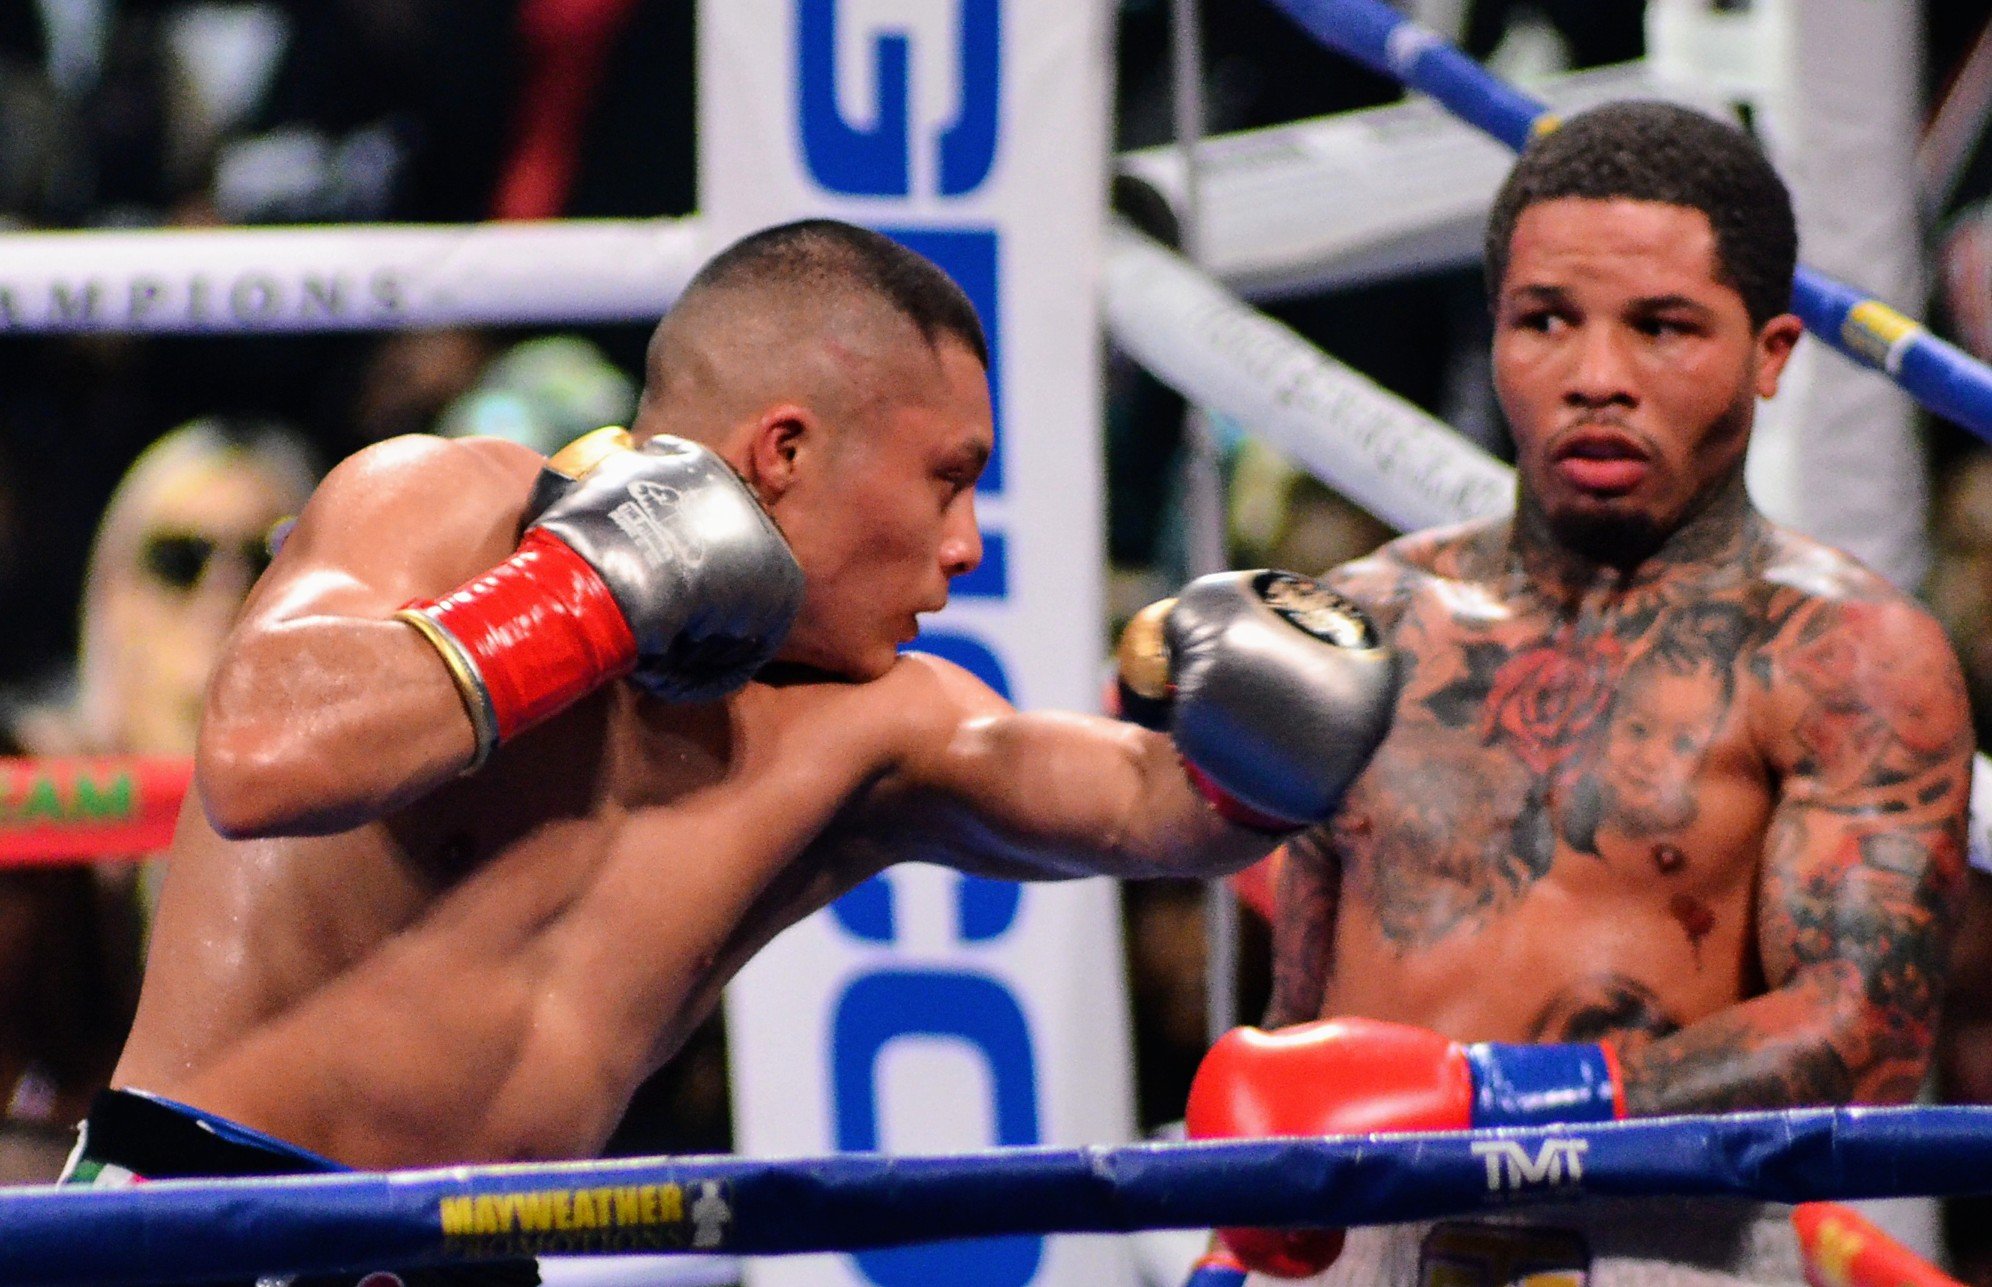 Gervonta Davis fights through injury, outpoints game Isaac Cruz by unanimous decision